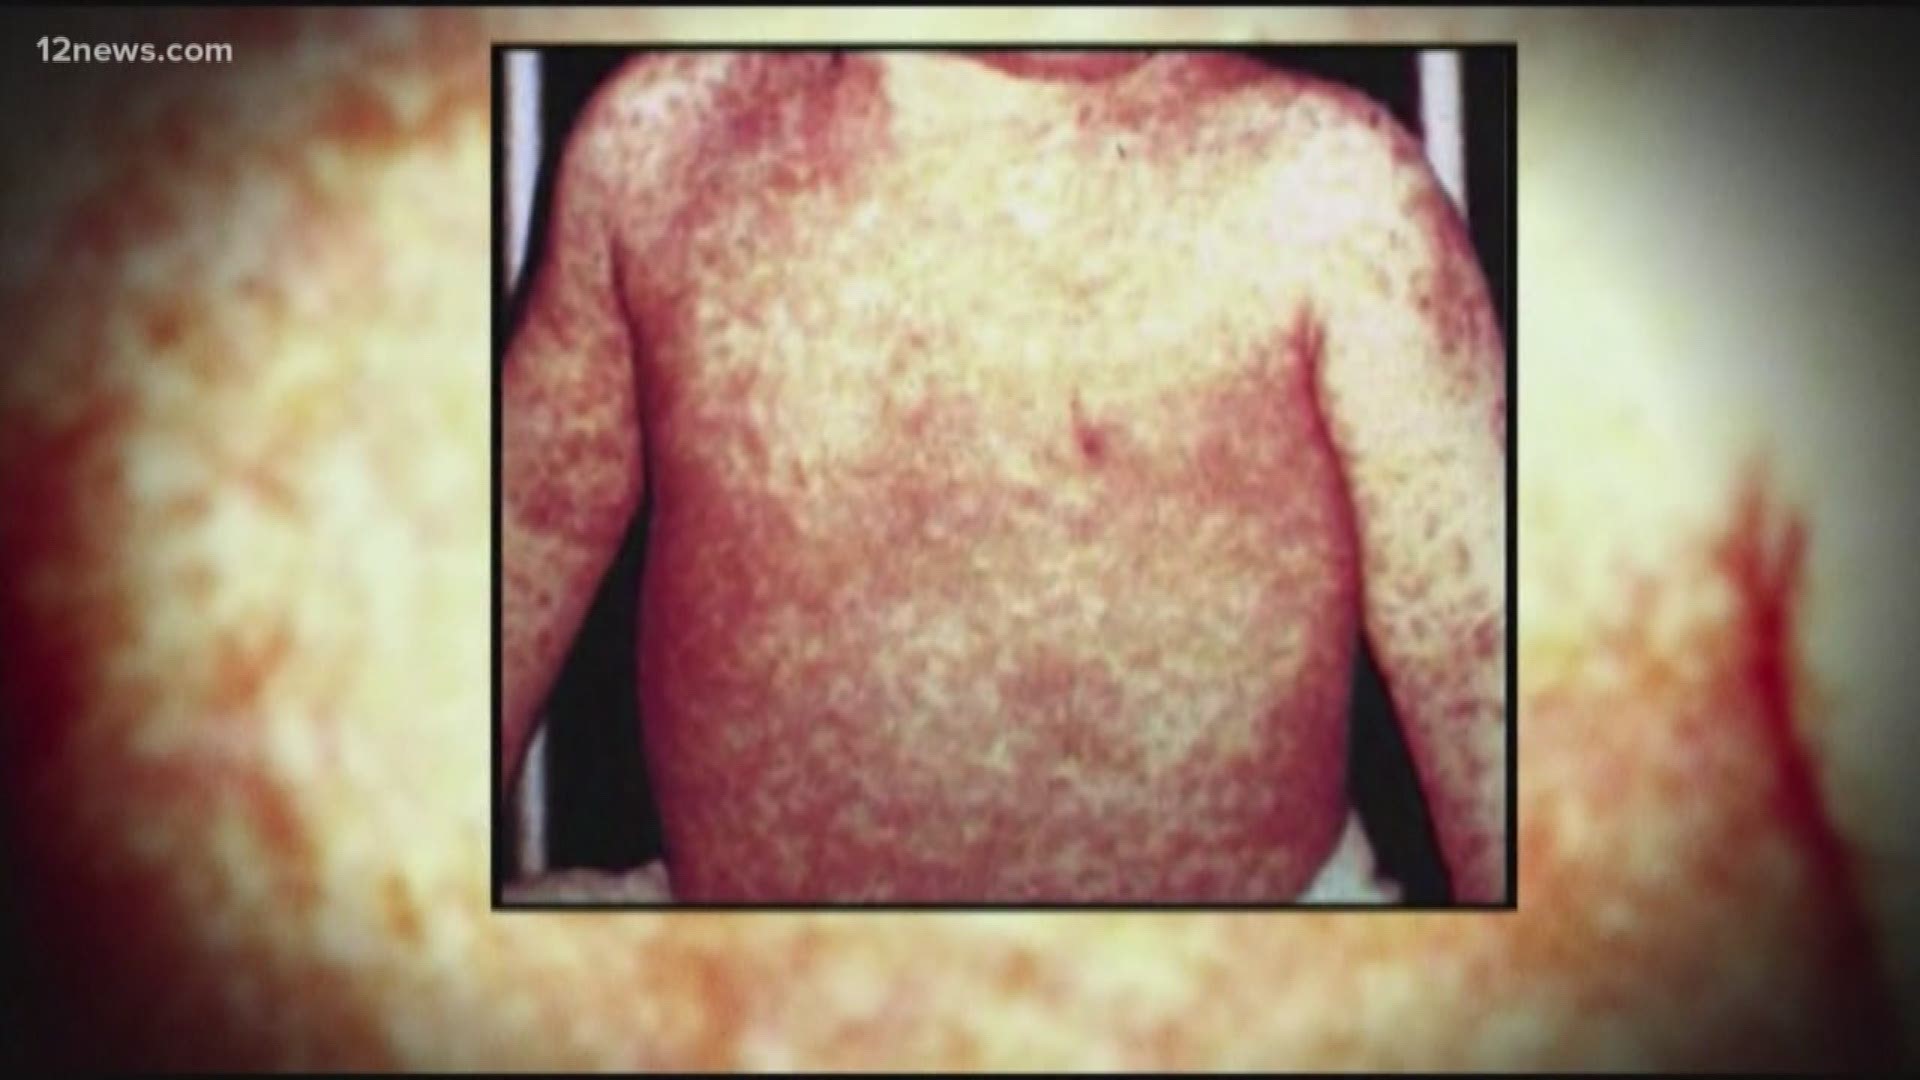 Public health officials are concerned about a potential outbreak of measles in Arizona. The number of immunized people in Arizona has dropped below 95%, the number needed to maintain "herd immunity". There aren't enough people vaccinated to keep an outbreak from happening, officials say.